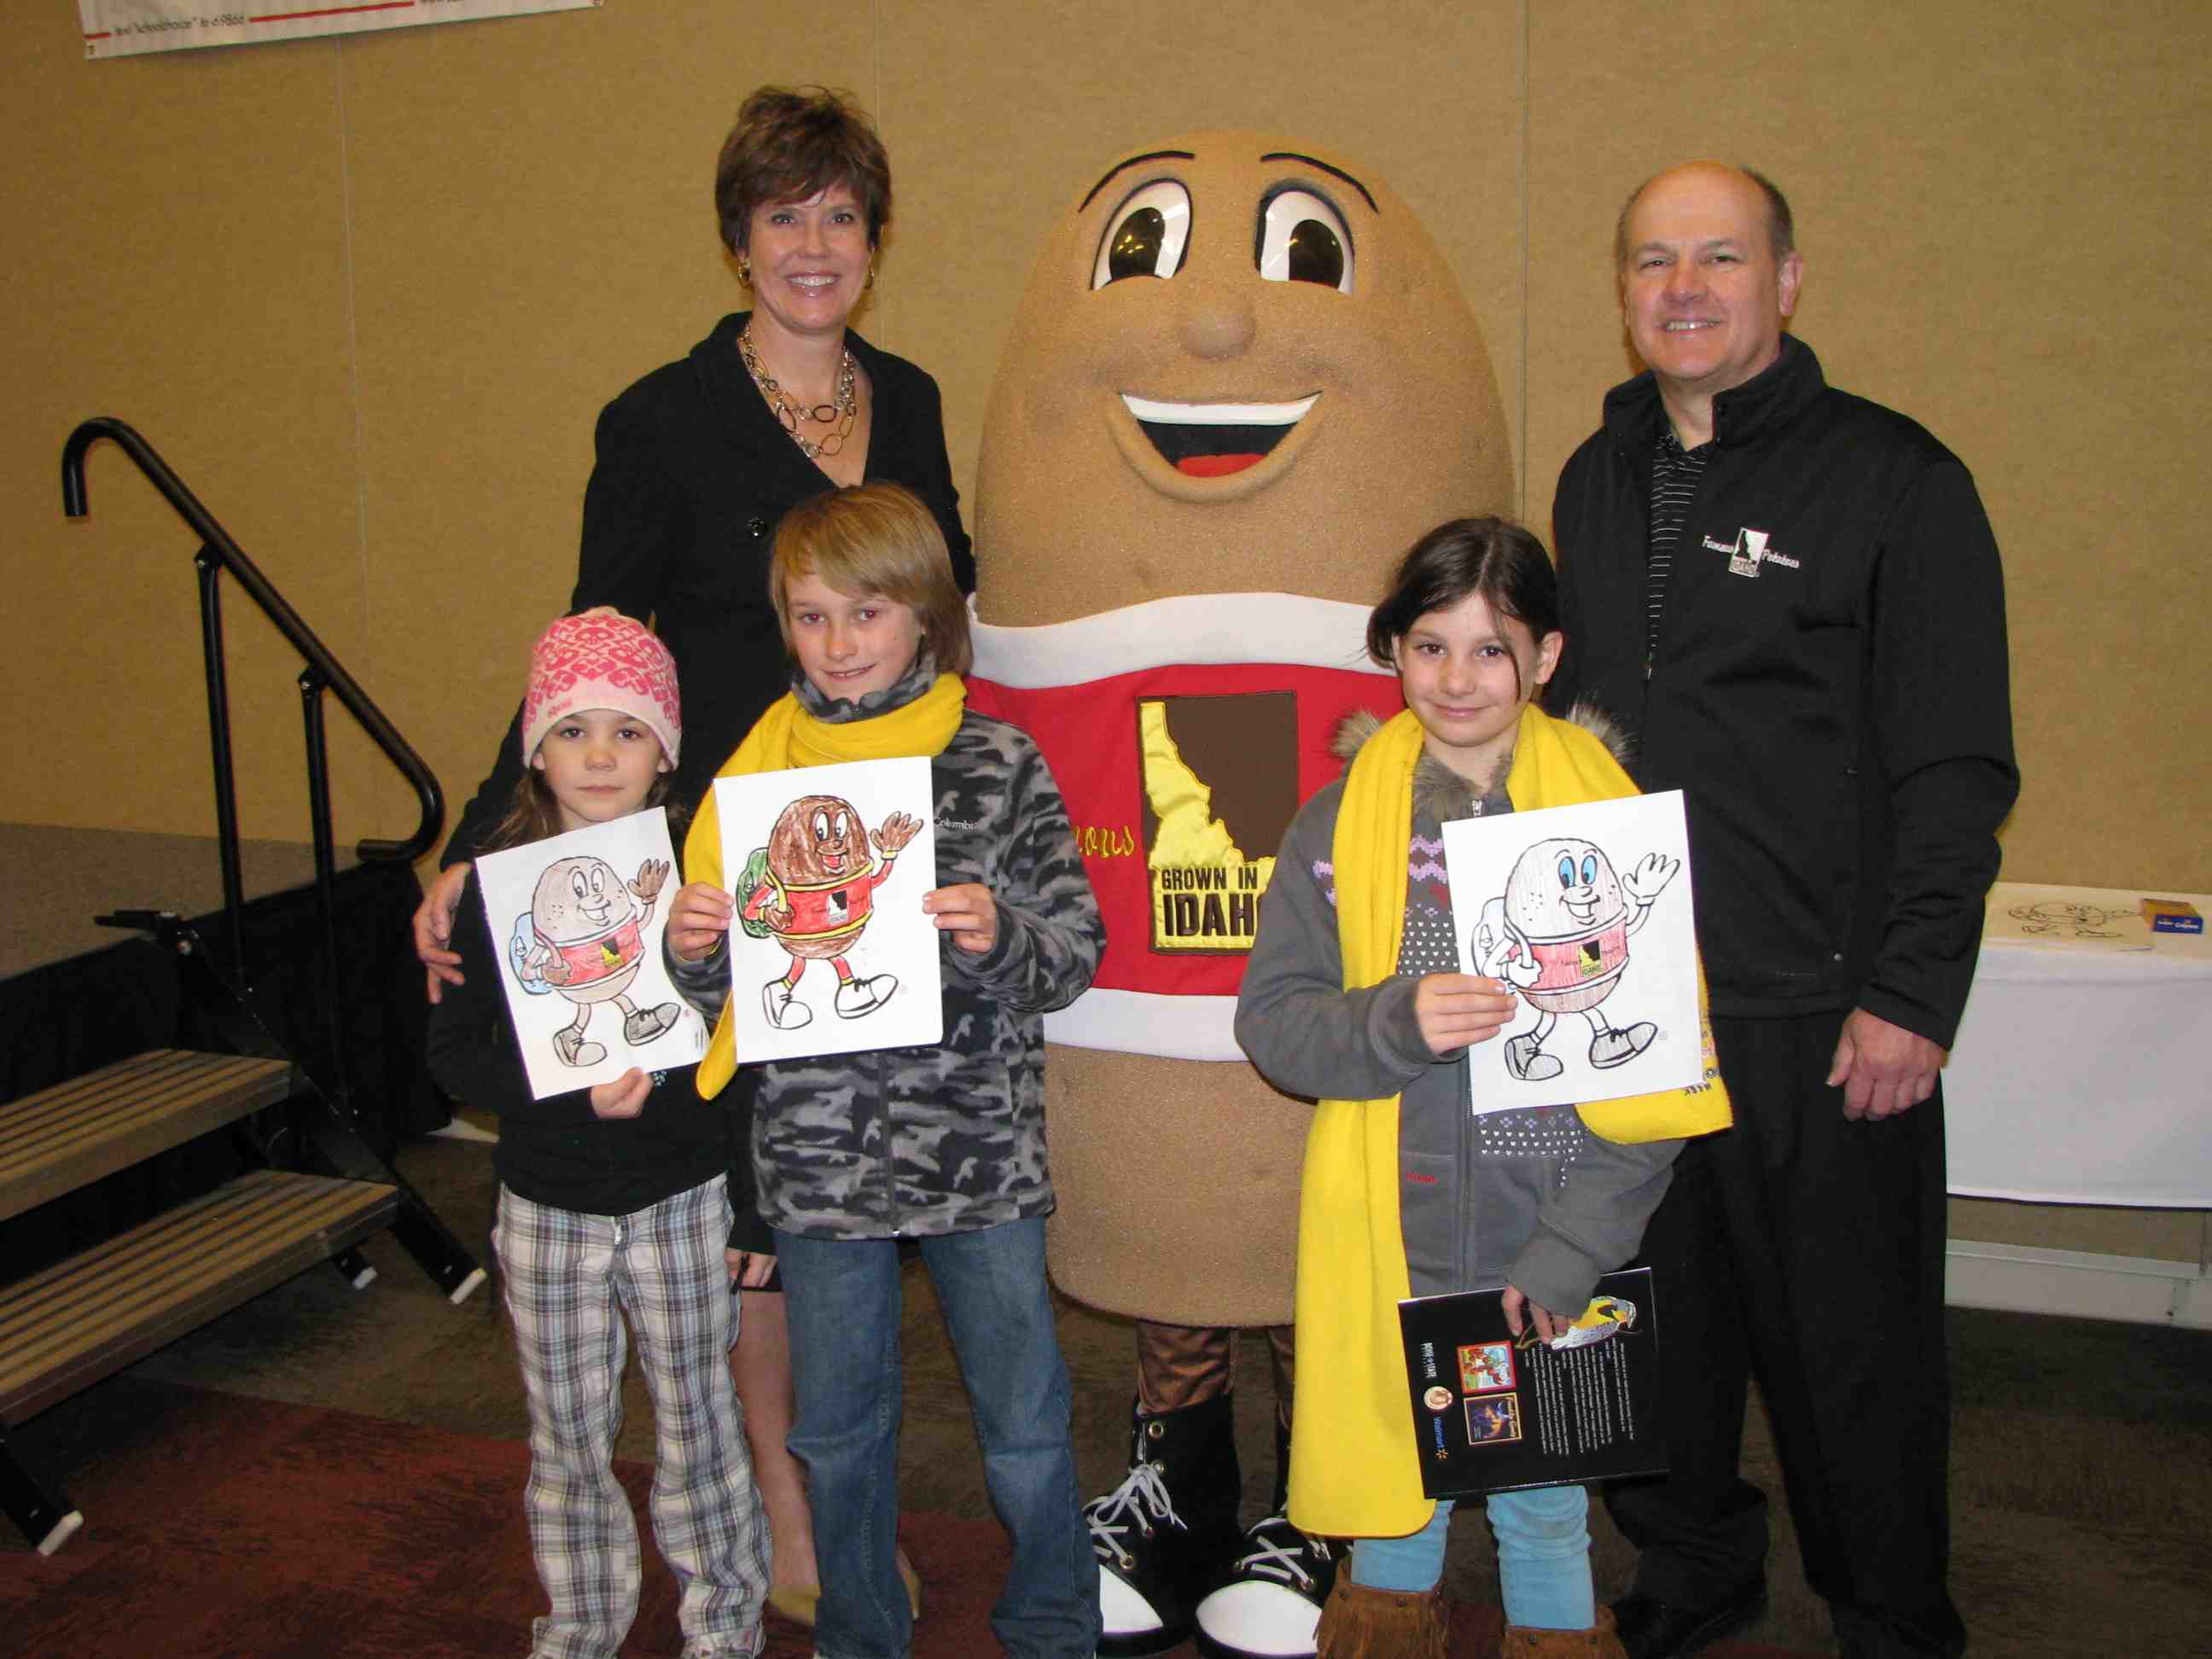 Lori Otter, Spuddy Buddy, and Frank Muir, President & CEO of the IPC help school children take a photo with their 